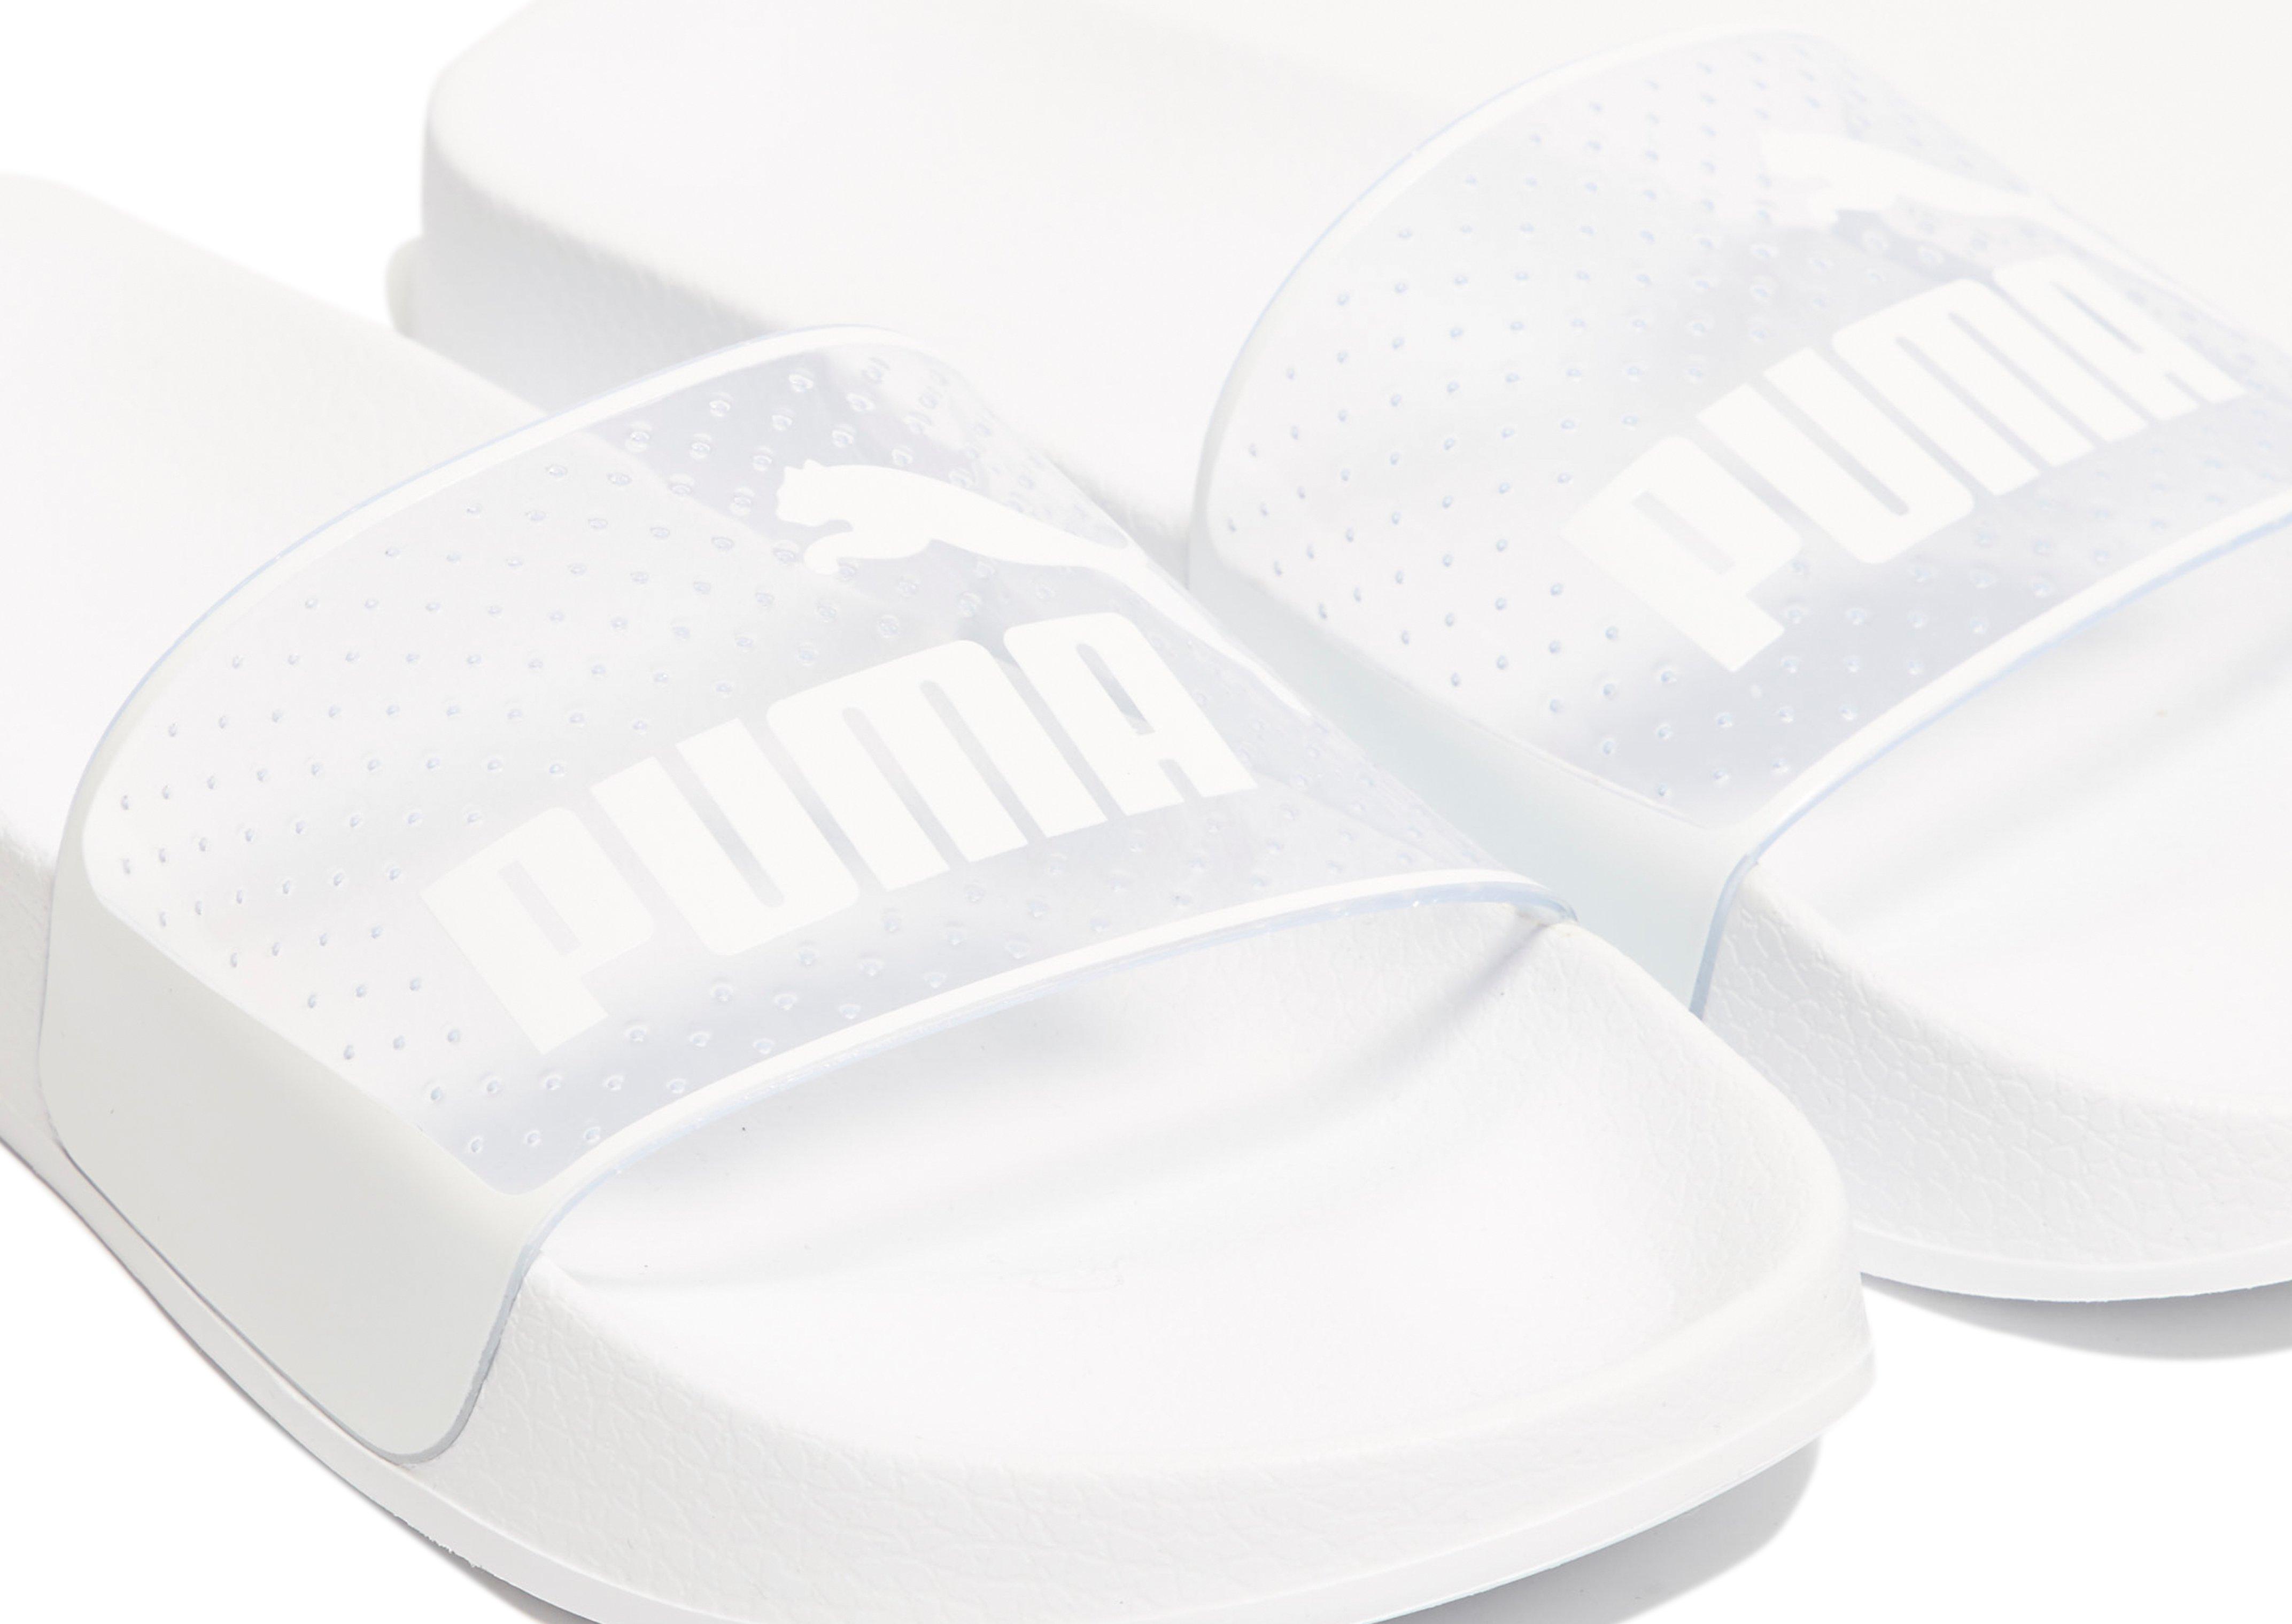 PUMA Synthetic Leadcat Jelly Slides in 